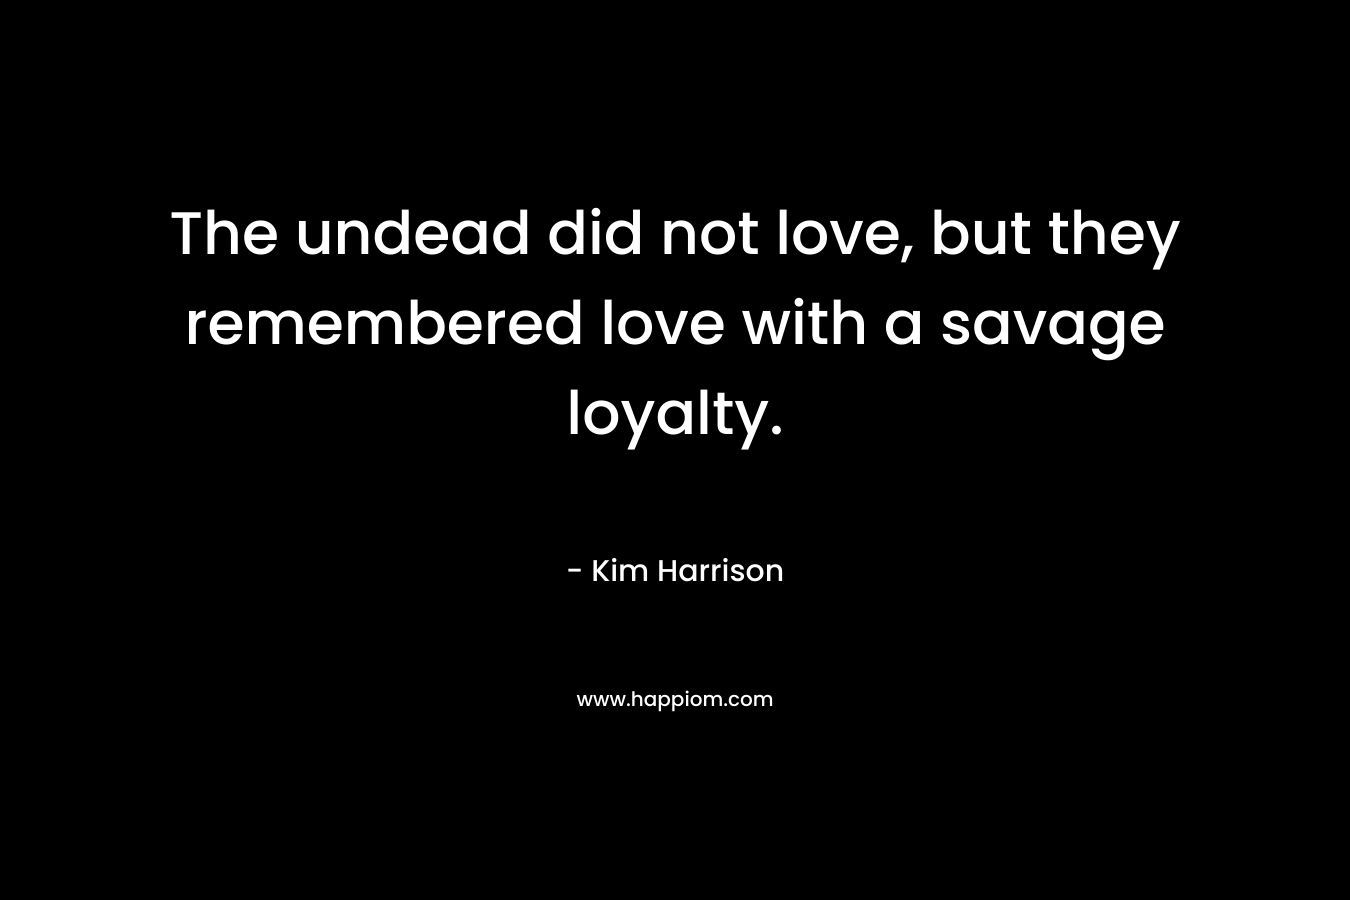 The undead did not love, but they remembered love with a savage loyalty. – Kim Harrison